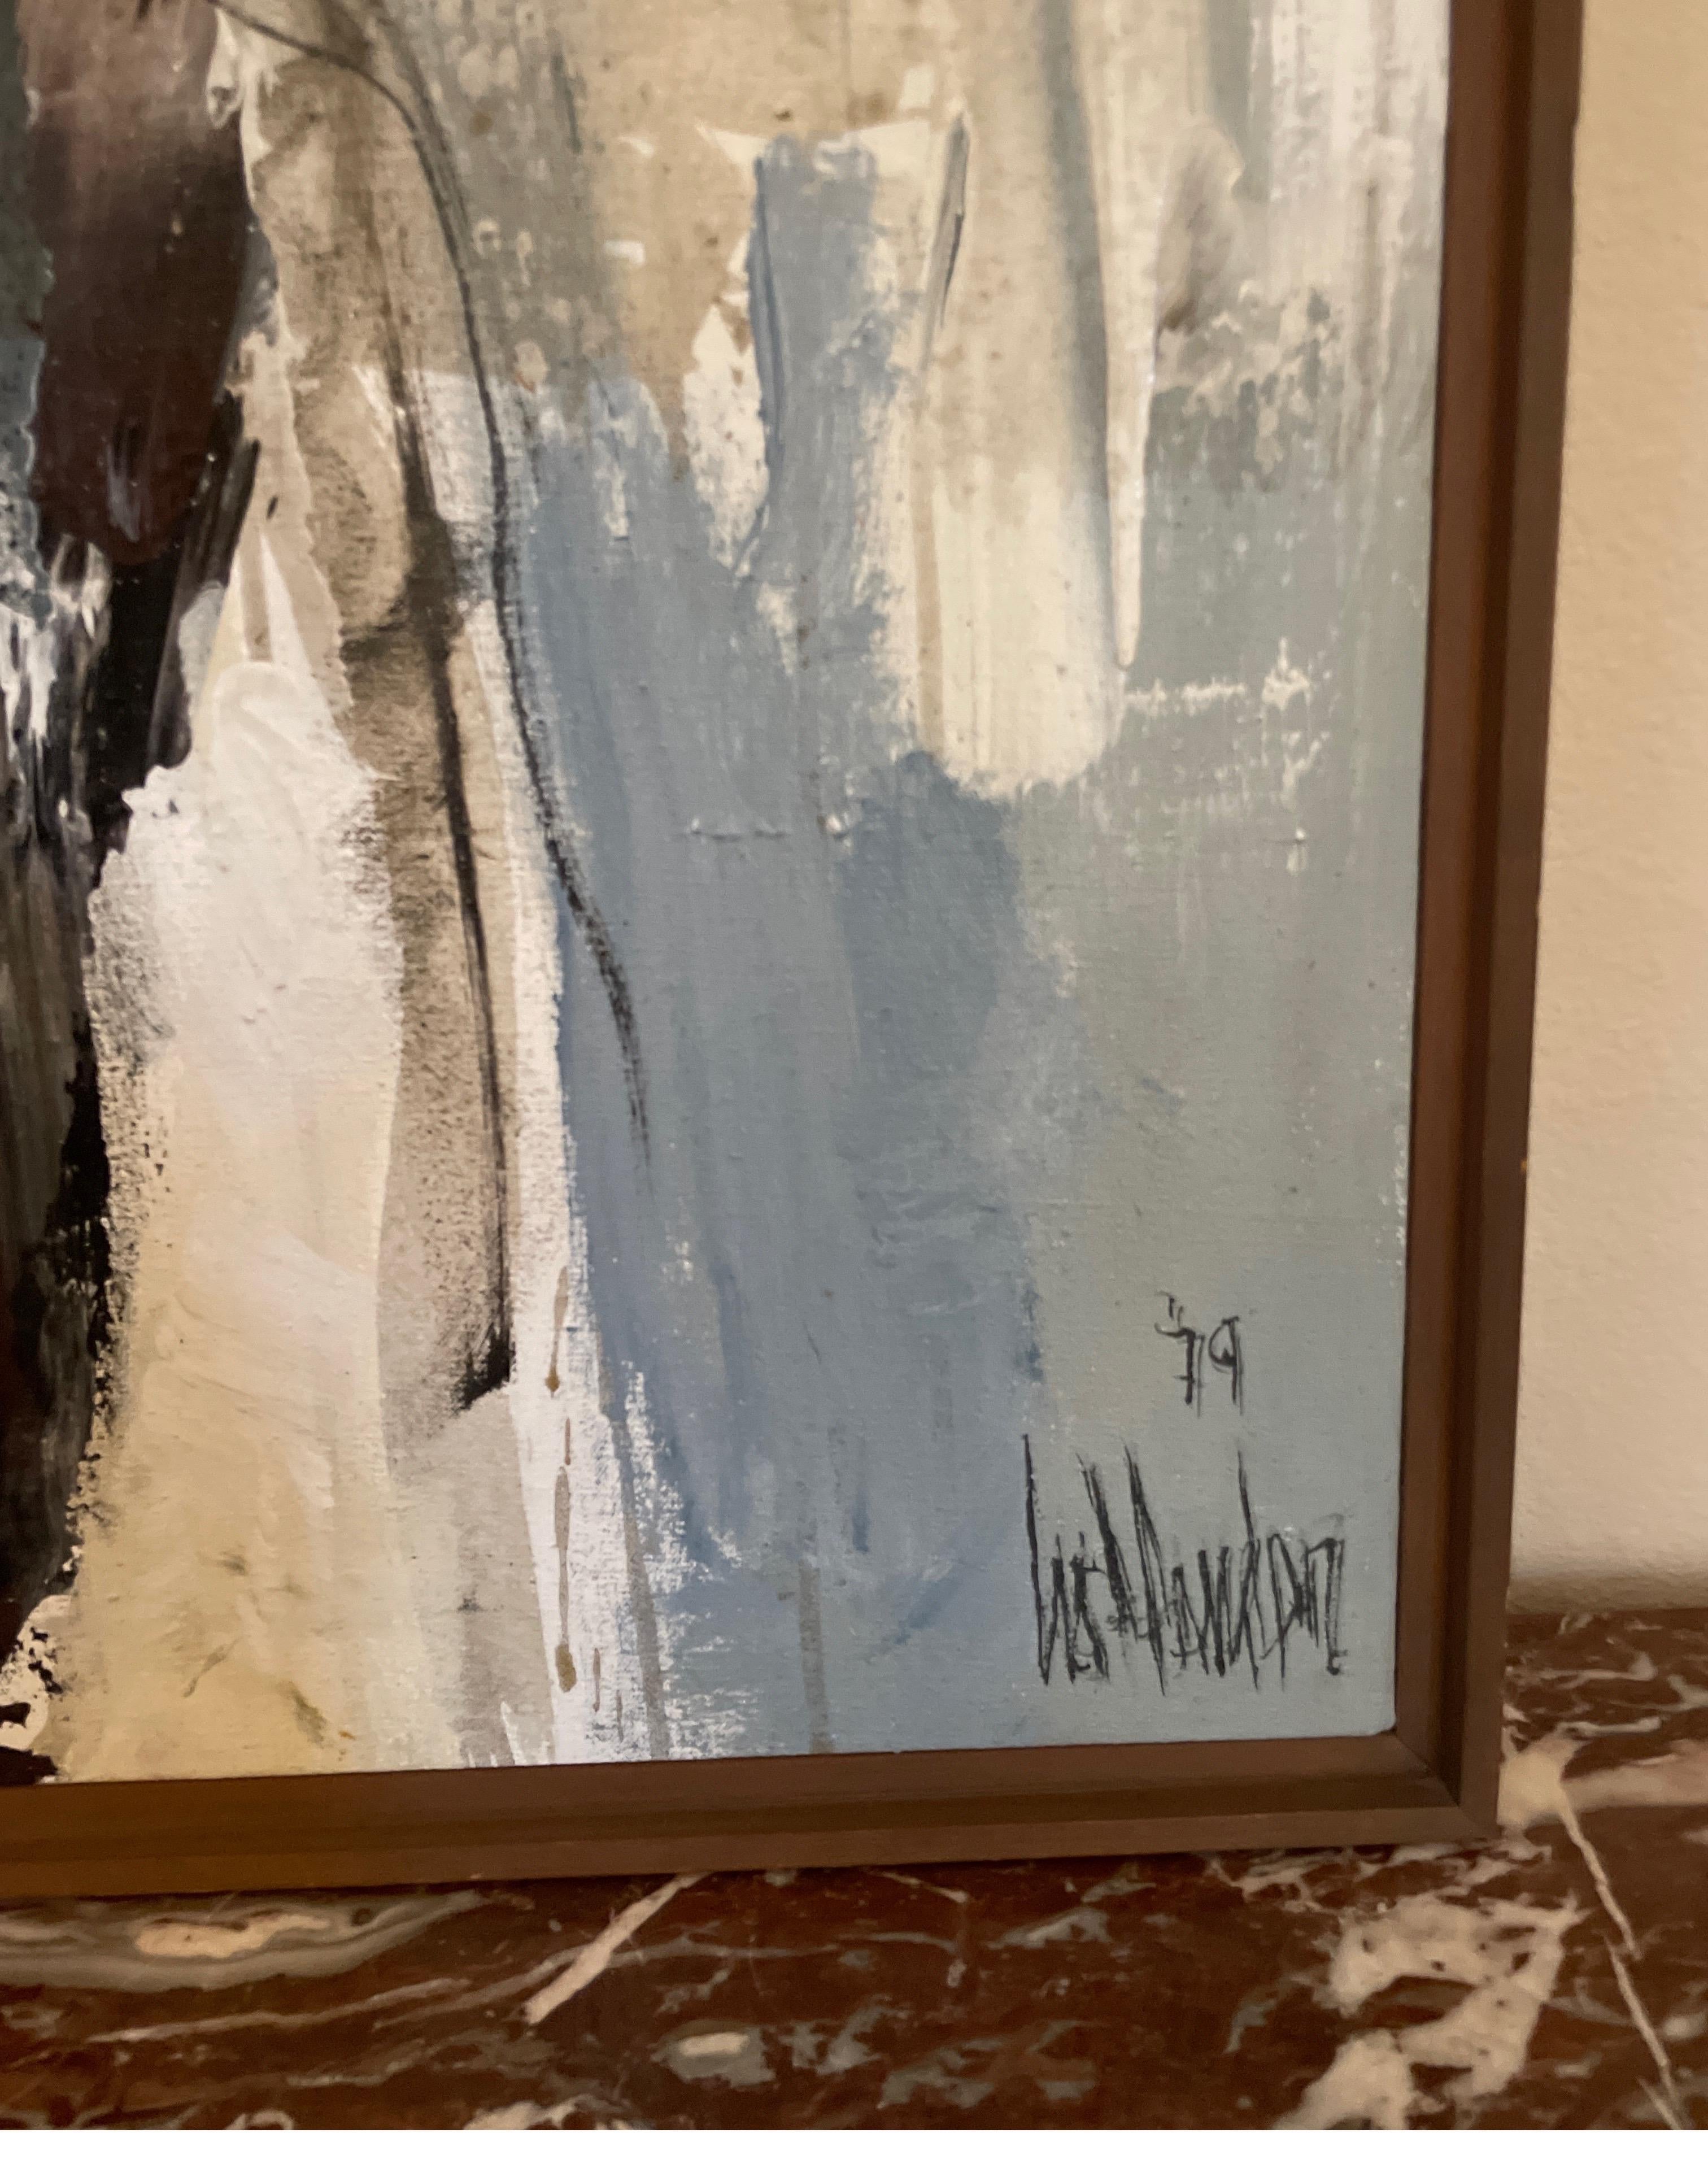 Striking abstract expressionist oil painting portrait by Gino Hollander. Excellent example of the fine work he was noted for. Very subtle colorations.